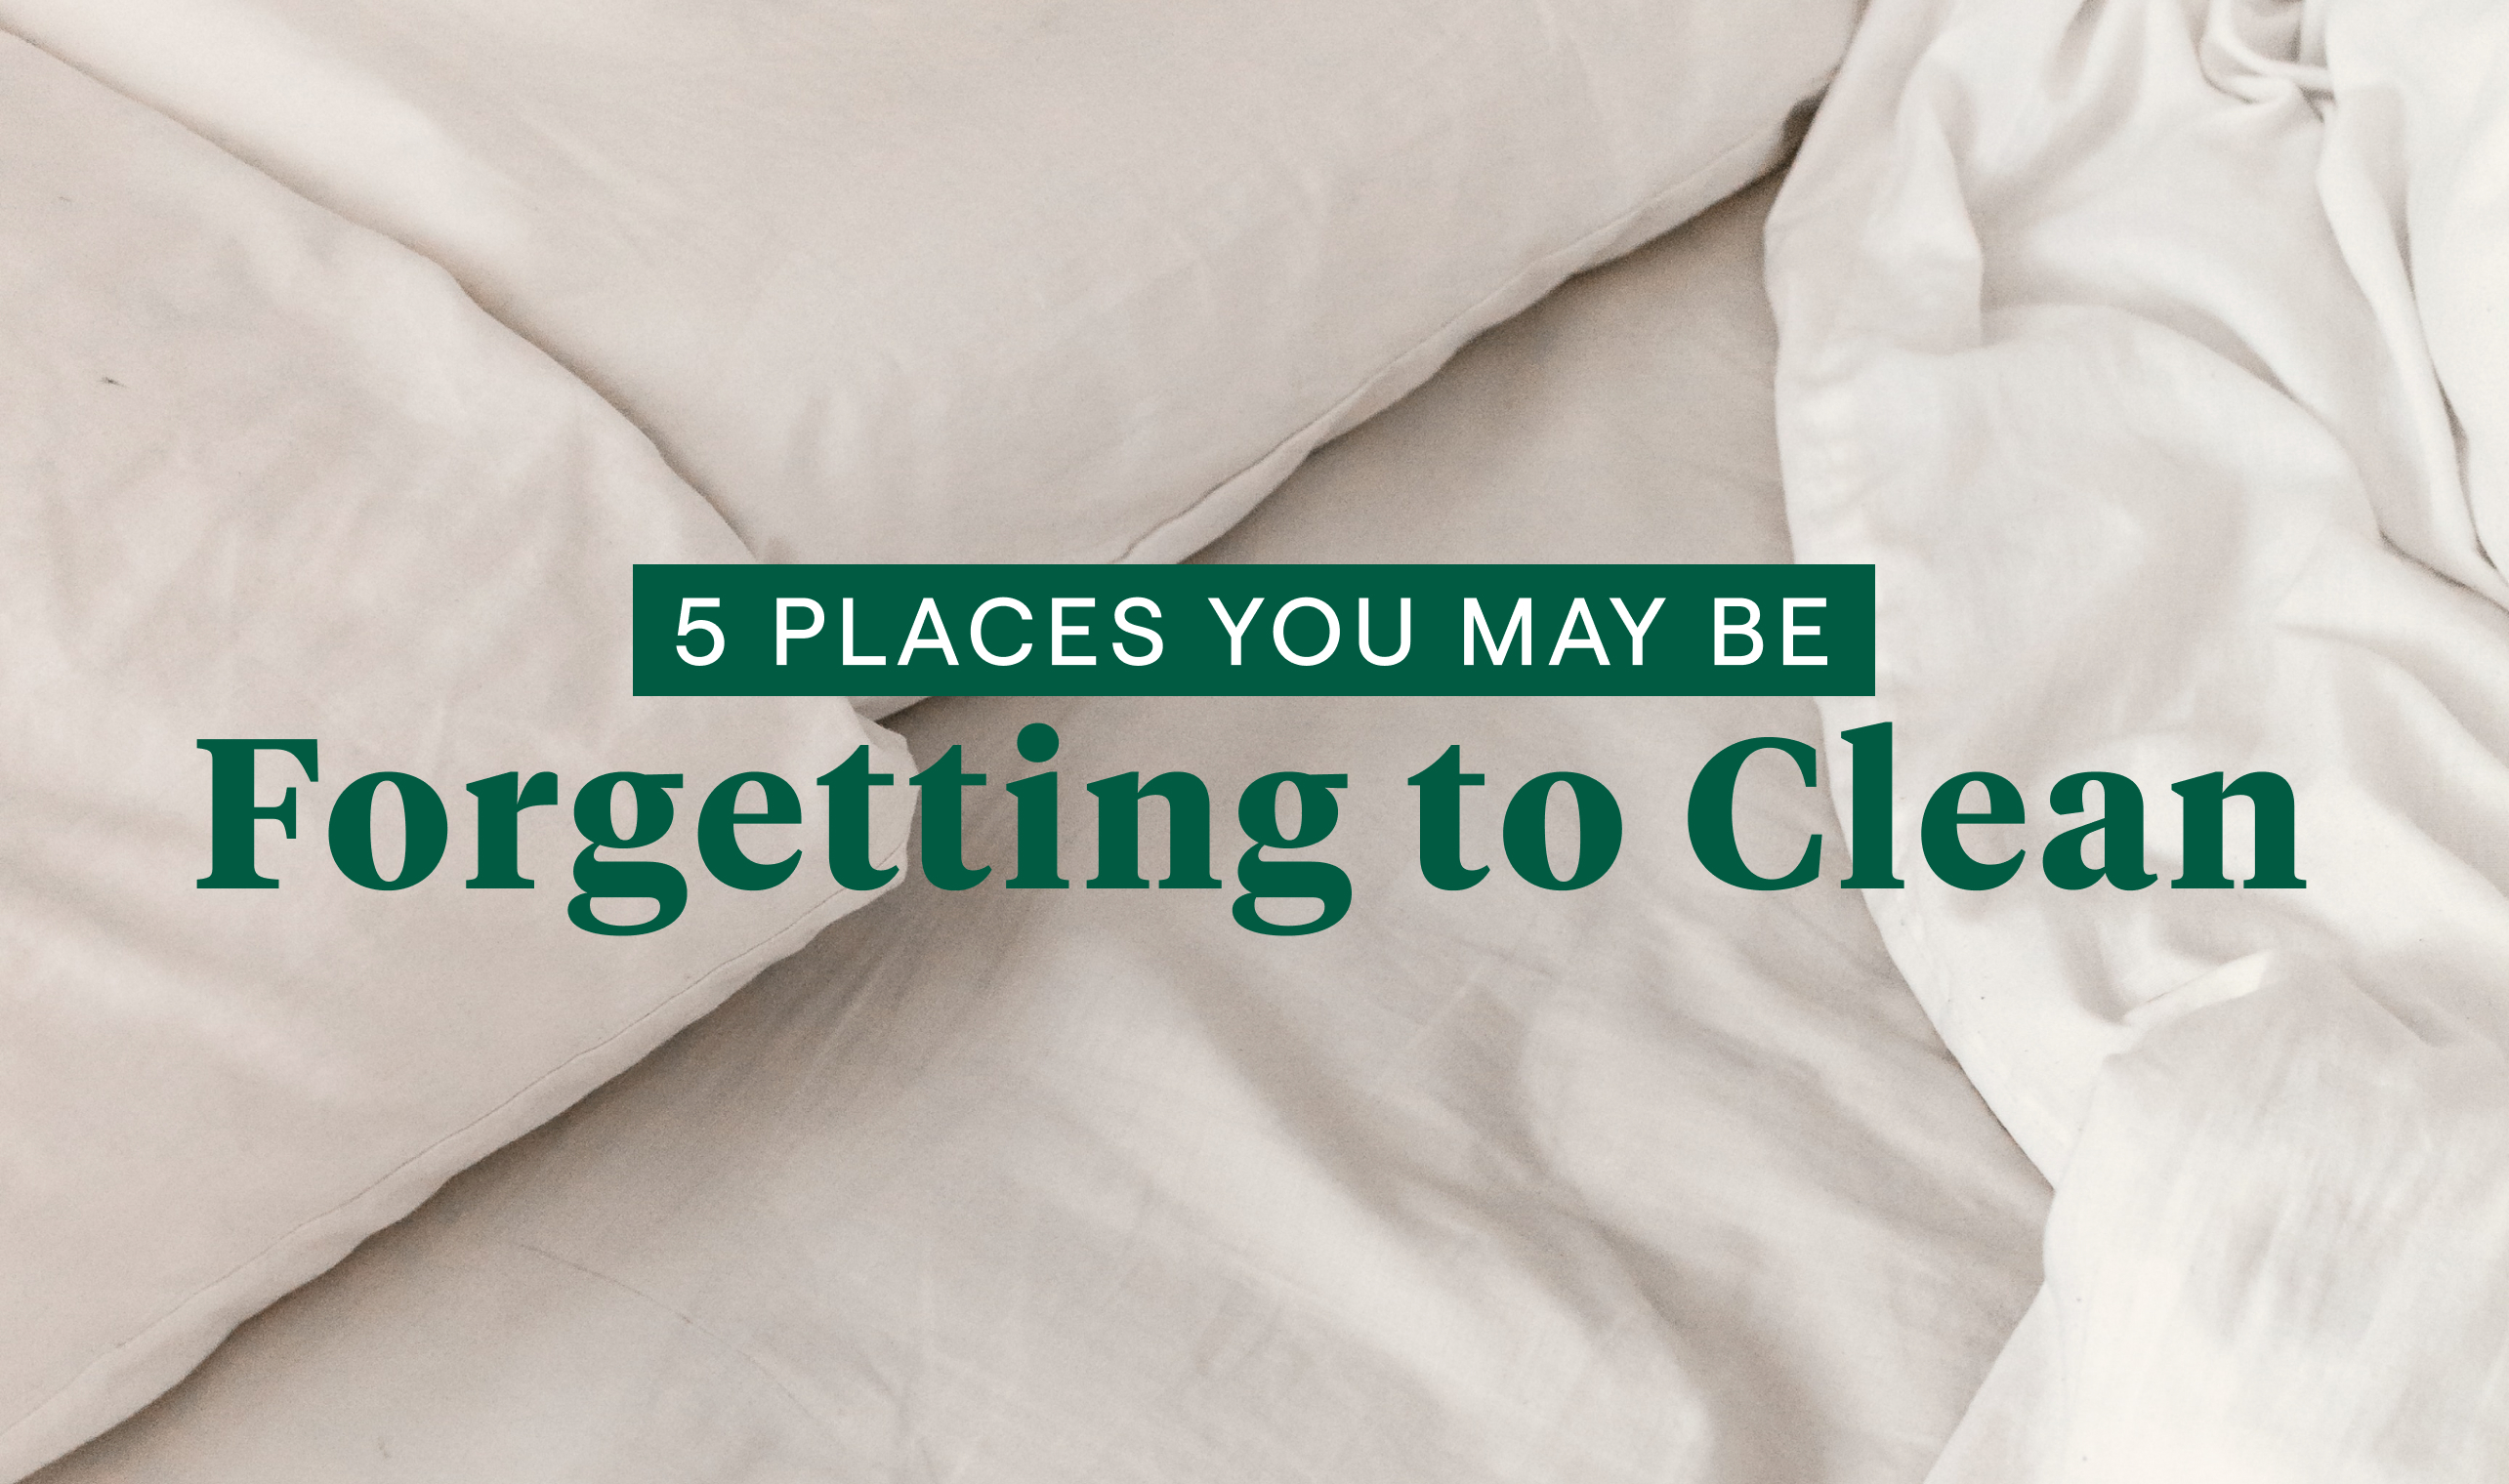 Bedding in background - 5 Places you may be forgetting to clean